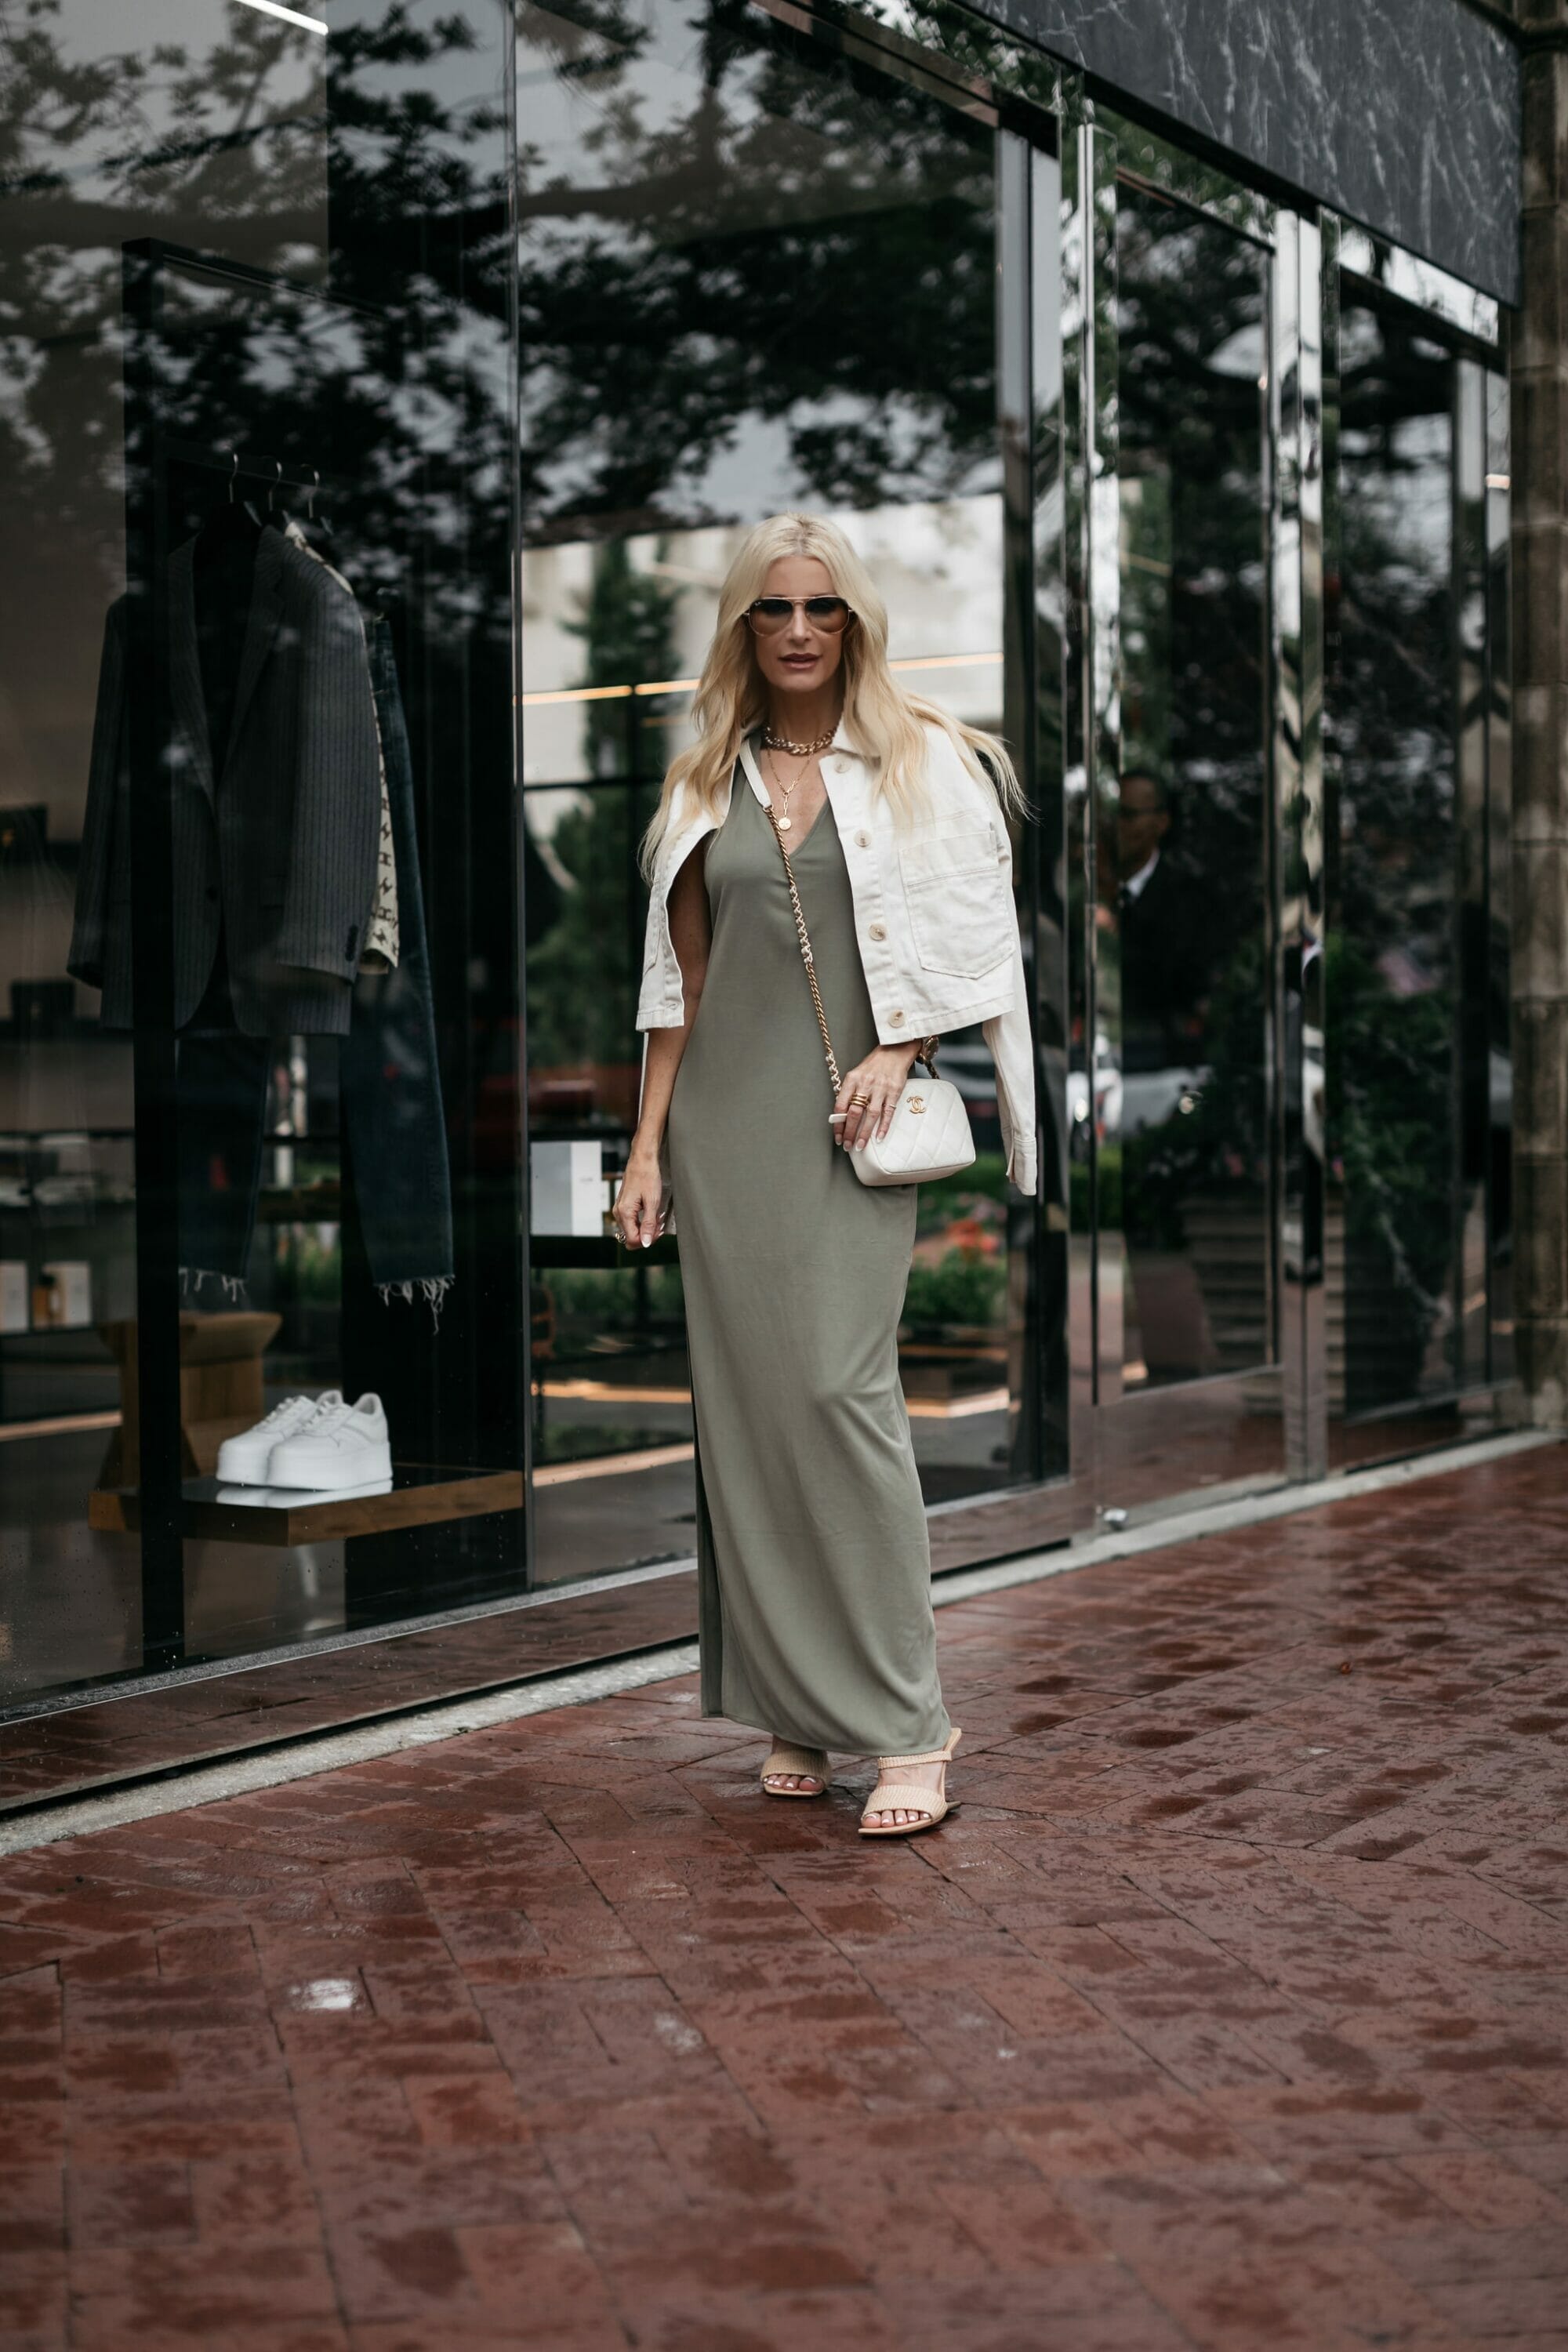 Dallas fashion stylist over 40 wearing olive green dress with an ivory jacket and neutral heels as one of 5 expensive looking color combinations.